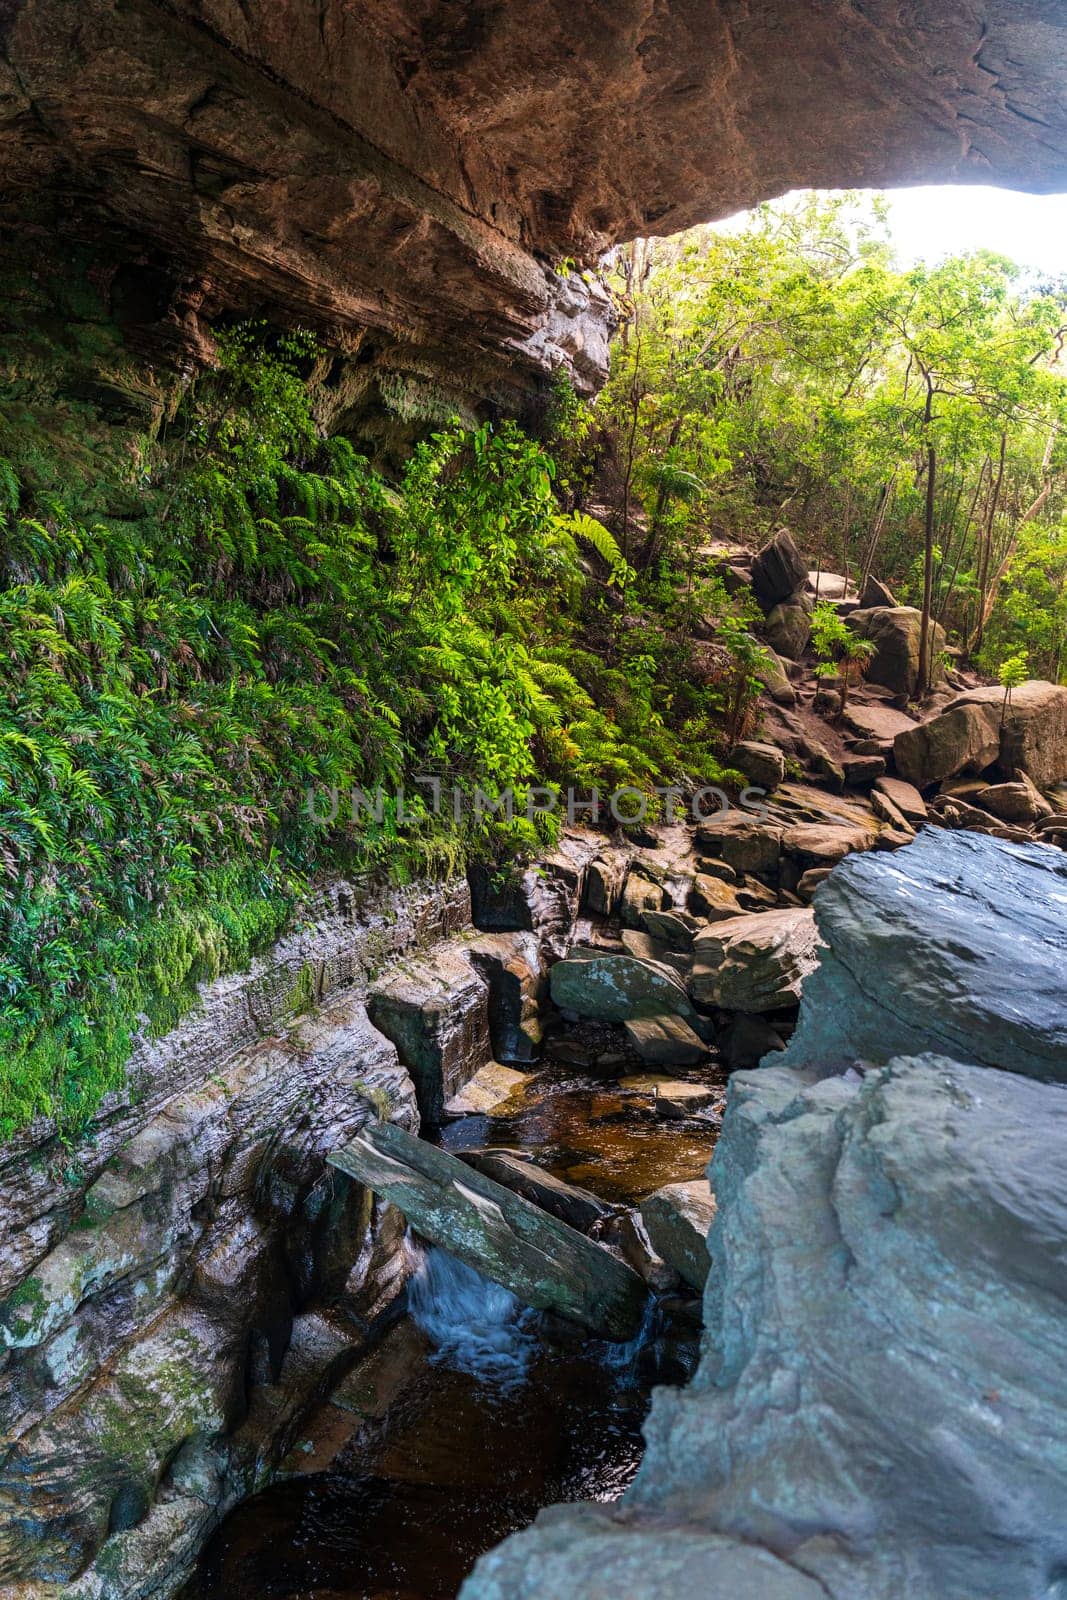 A picturesque stream flows through a lush forest, symbolizing tranquility and natural splendor.